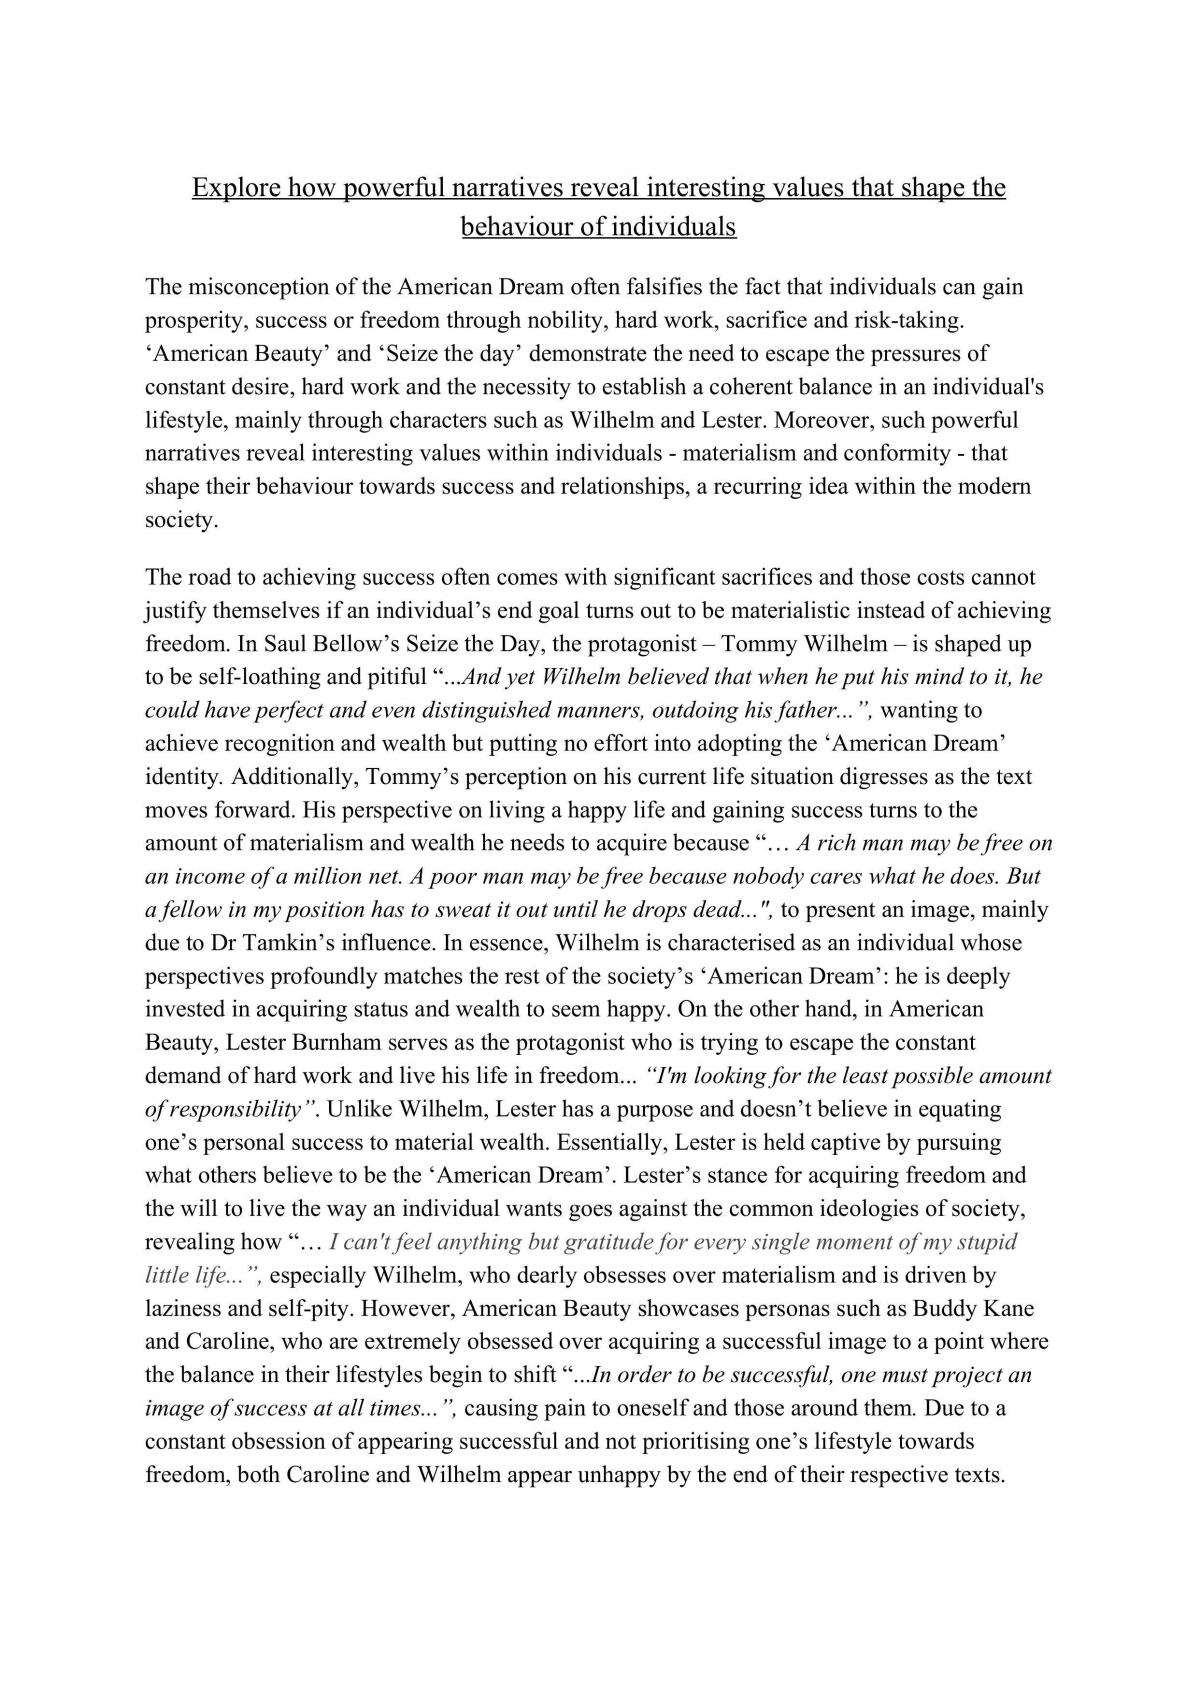 American Beauty and Seize the Day - English Advanced Essay - Page 1